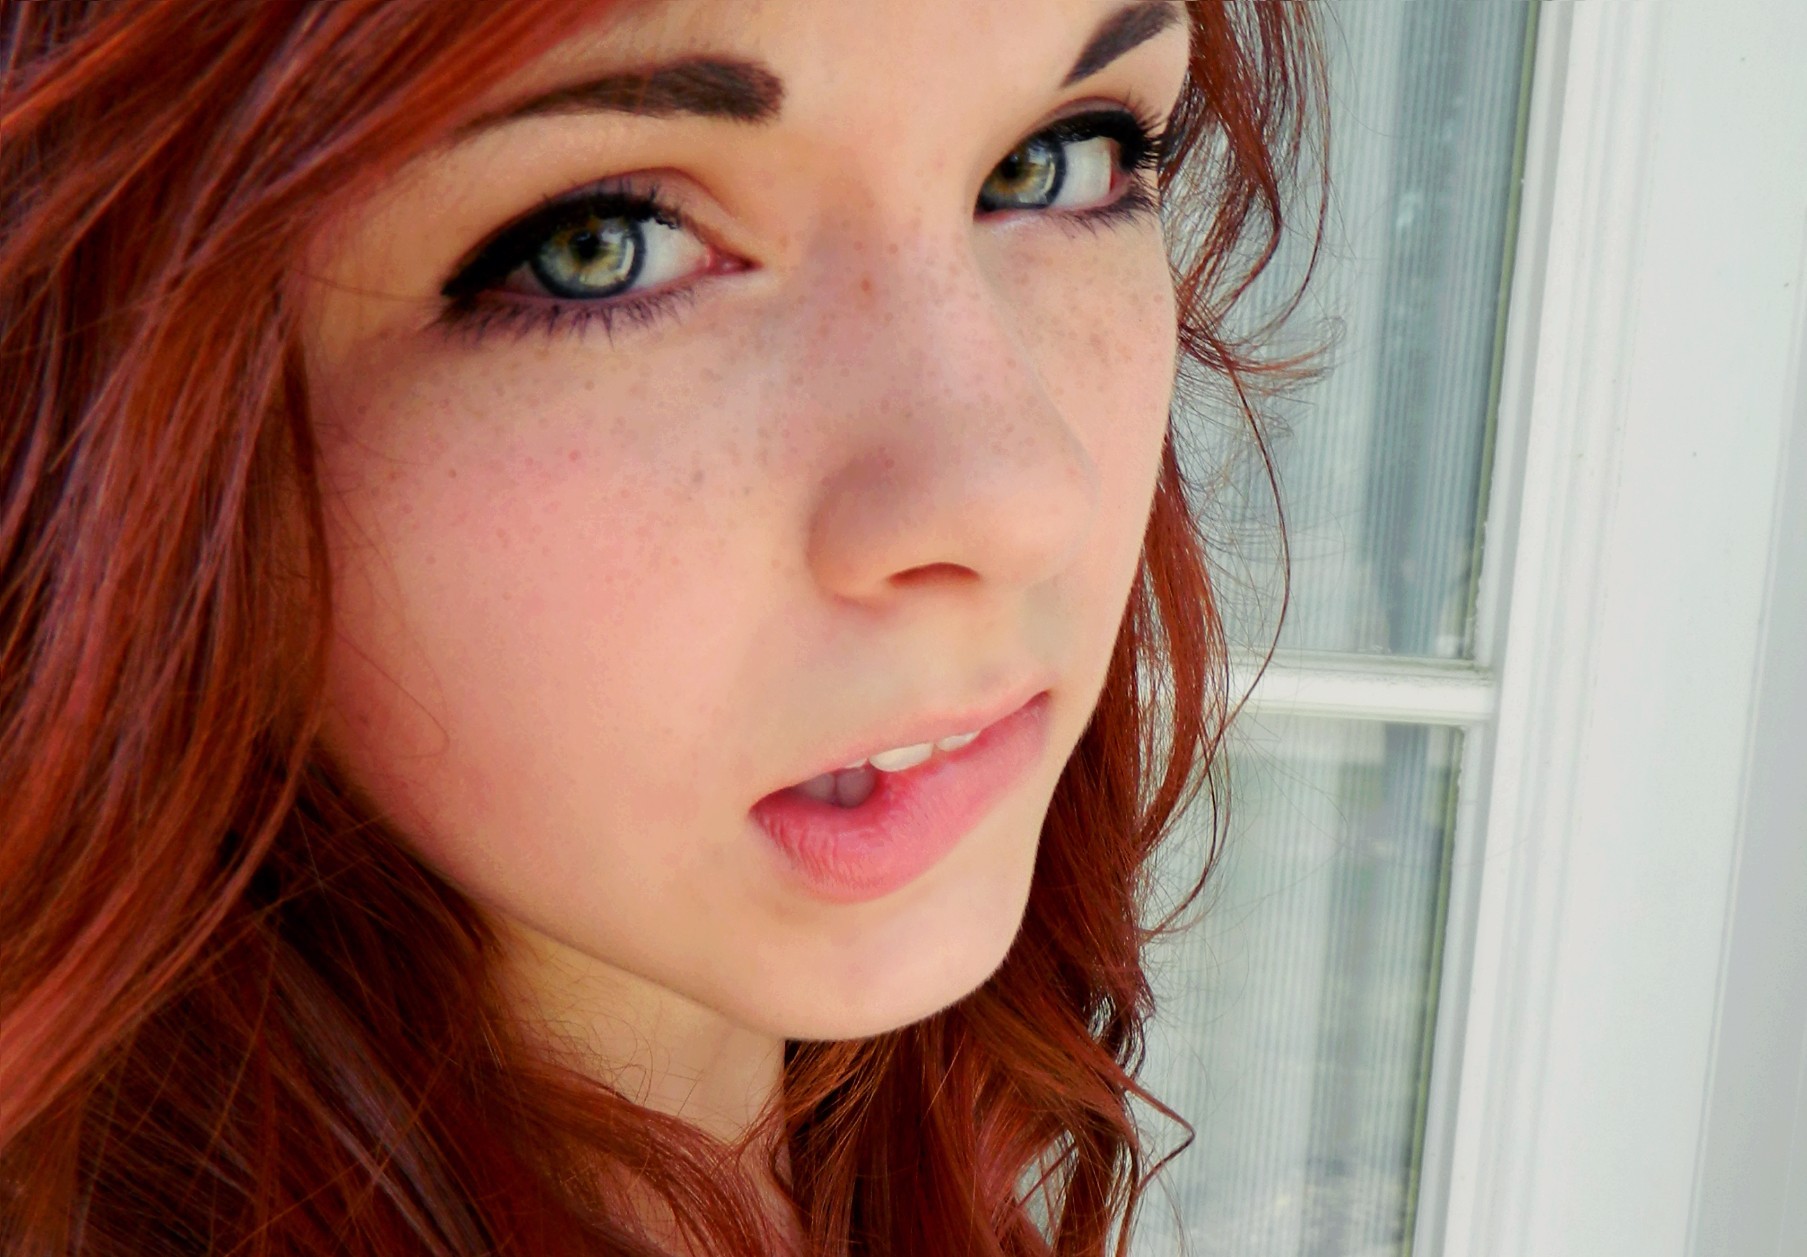 People 1807x1257 redhead women green eyes face freckles biting lips closeup looking at viewer Claire Monnier